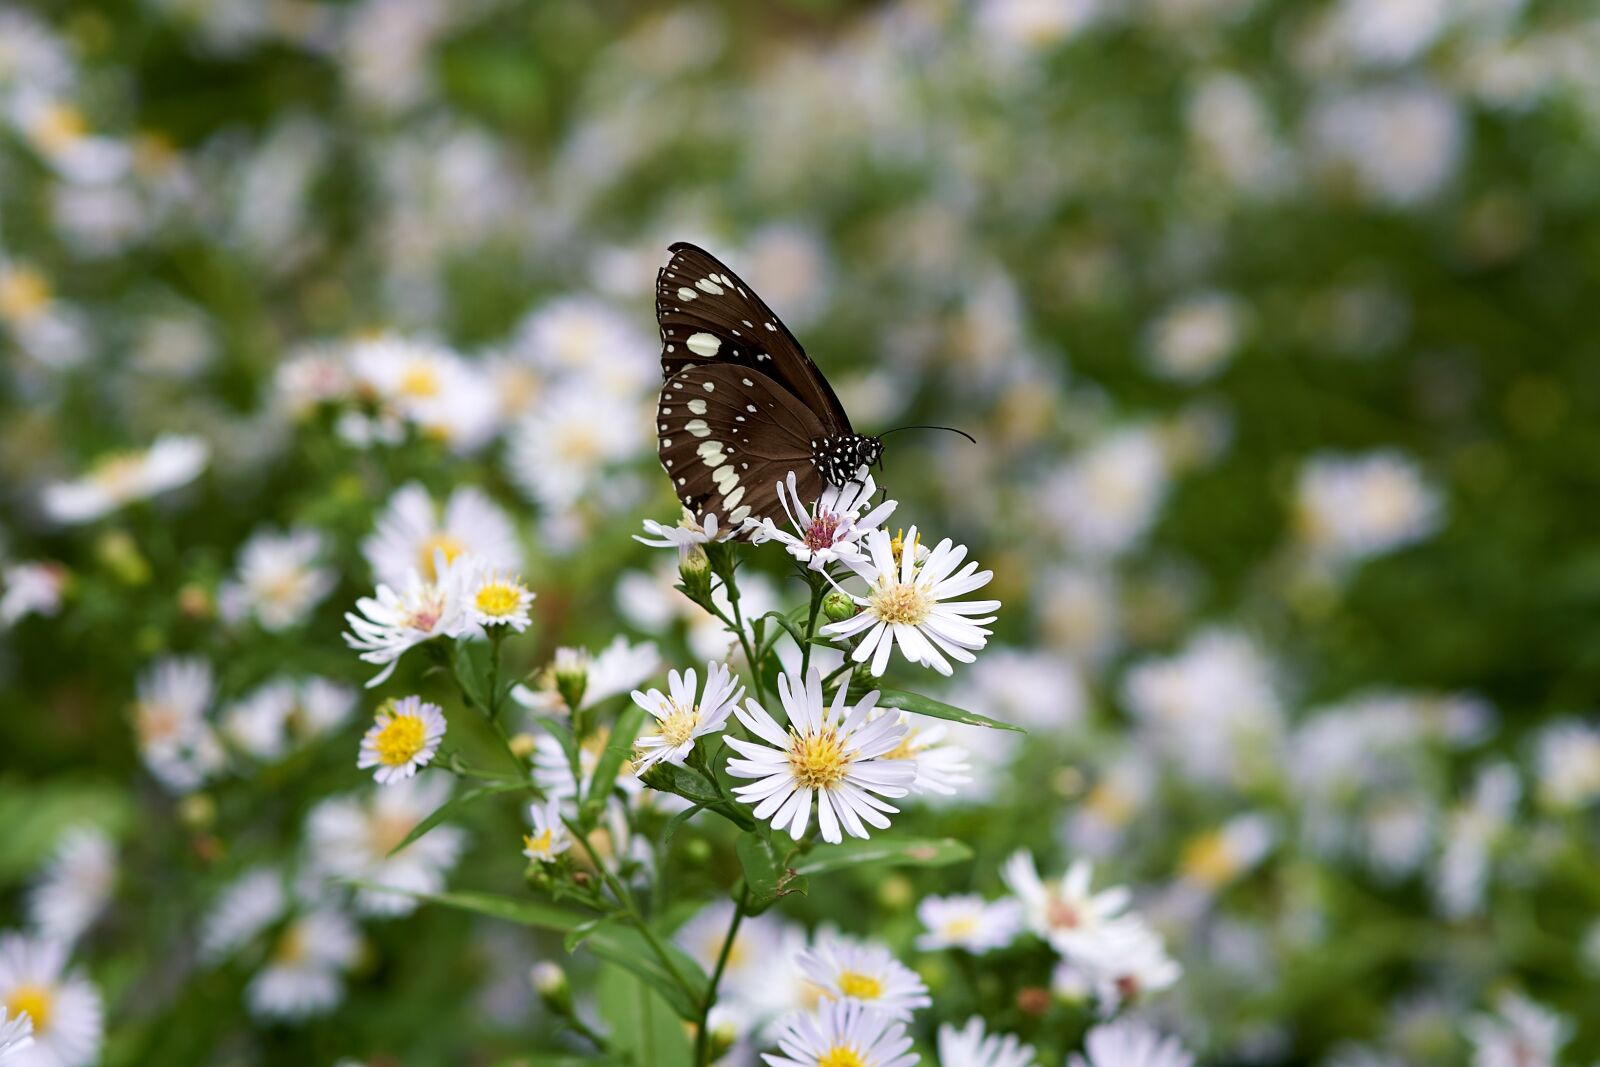 Sony FE 85mm F1.8 sample photo. Butterfly, flowers, nature photography